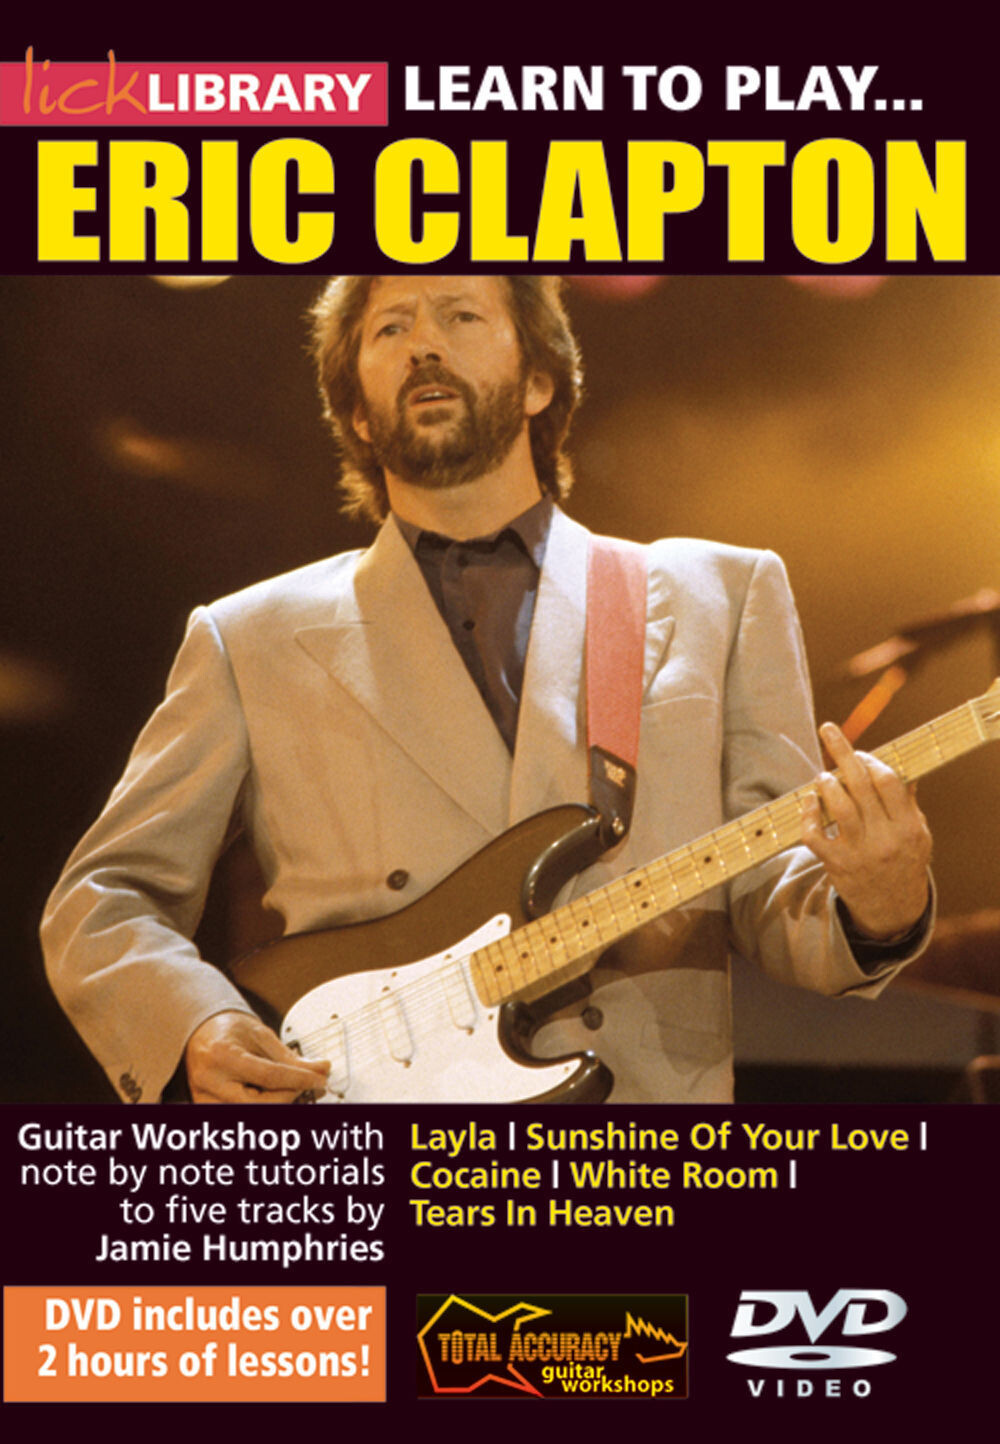 Lick Library Presents: Learn to Play Eric Clapton